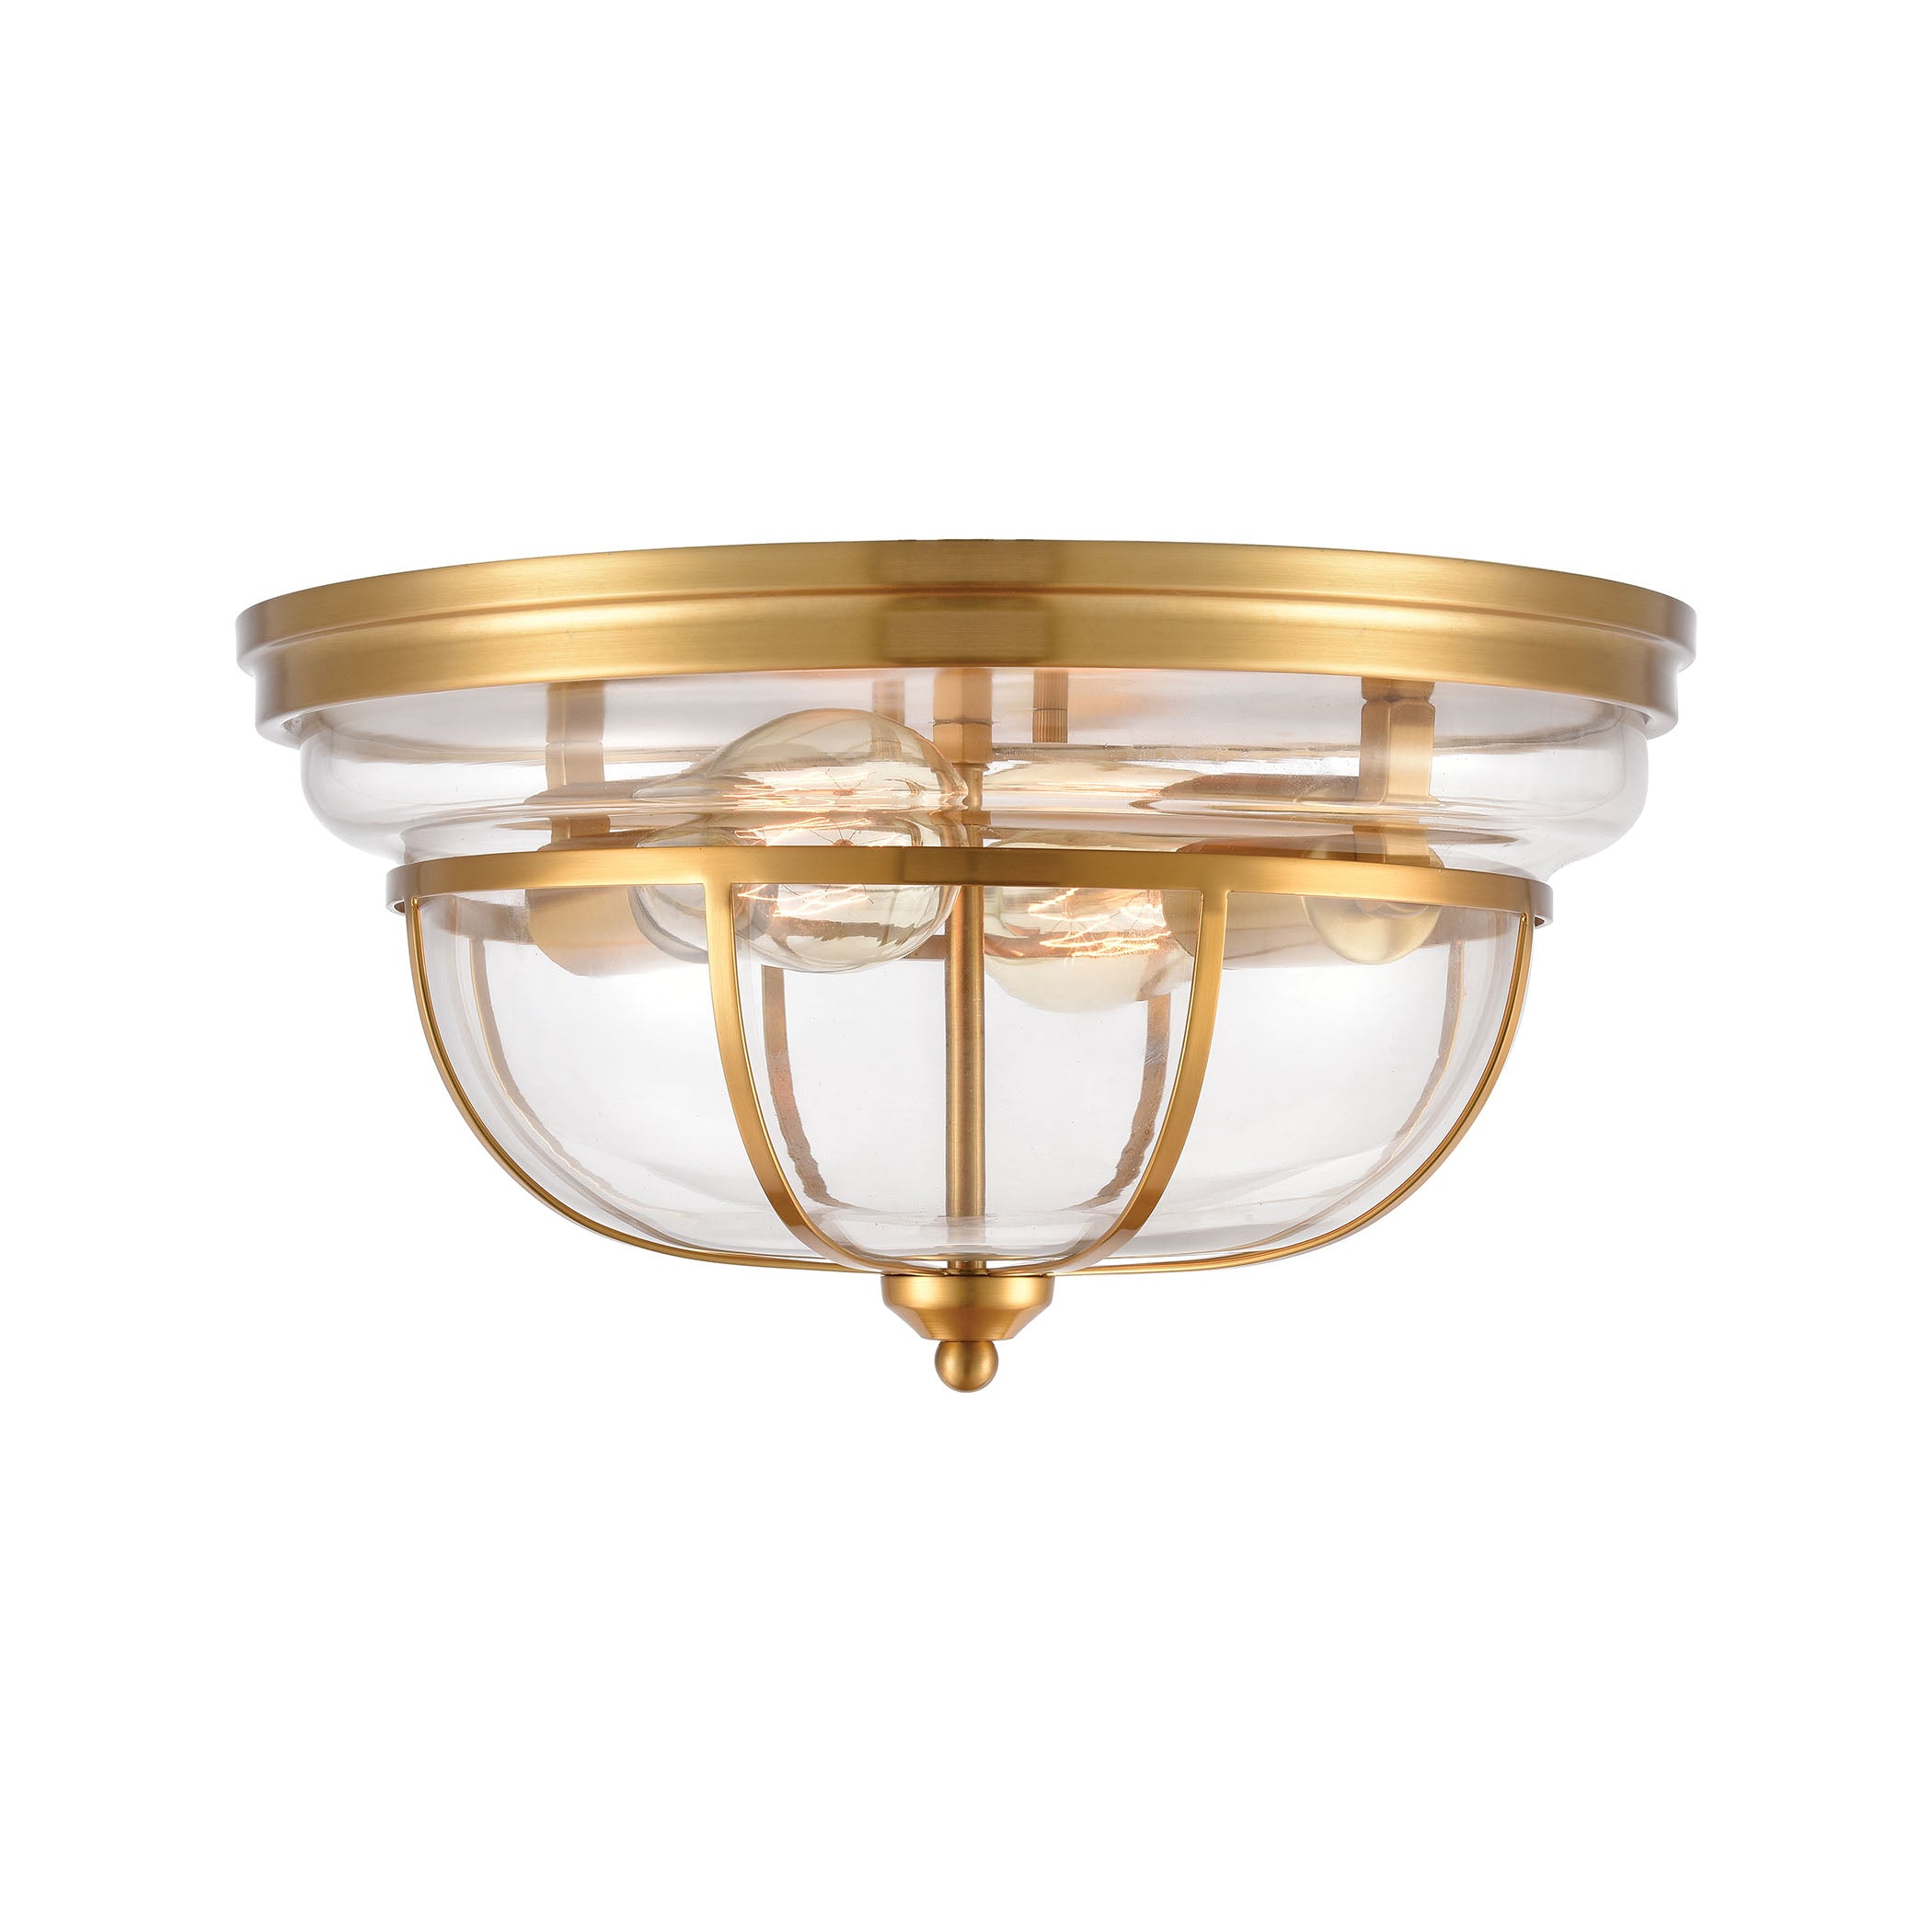 ELK Lighting 46574/2 Manhattan Boutique 2-Light Flush Mount in Brushed Brass with Clear Glass